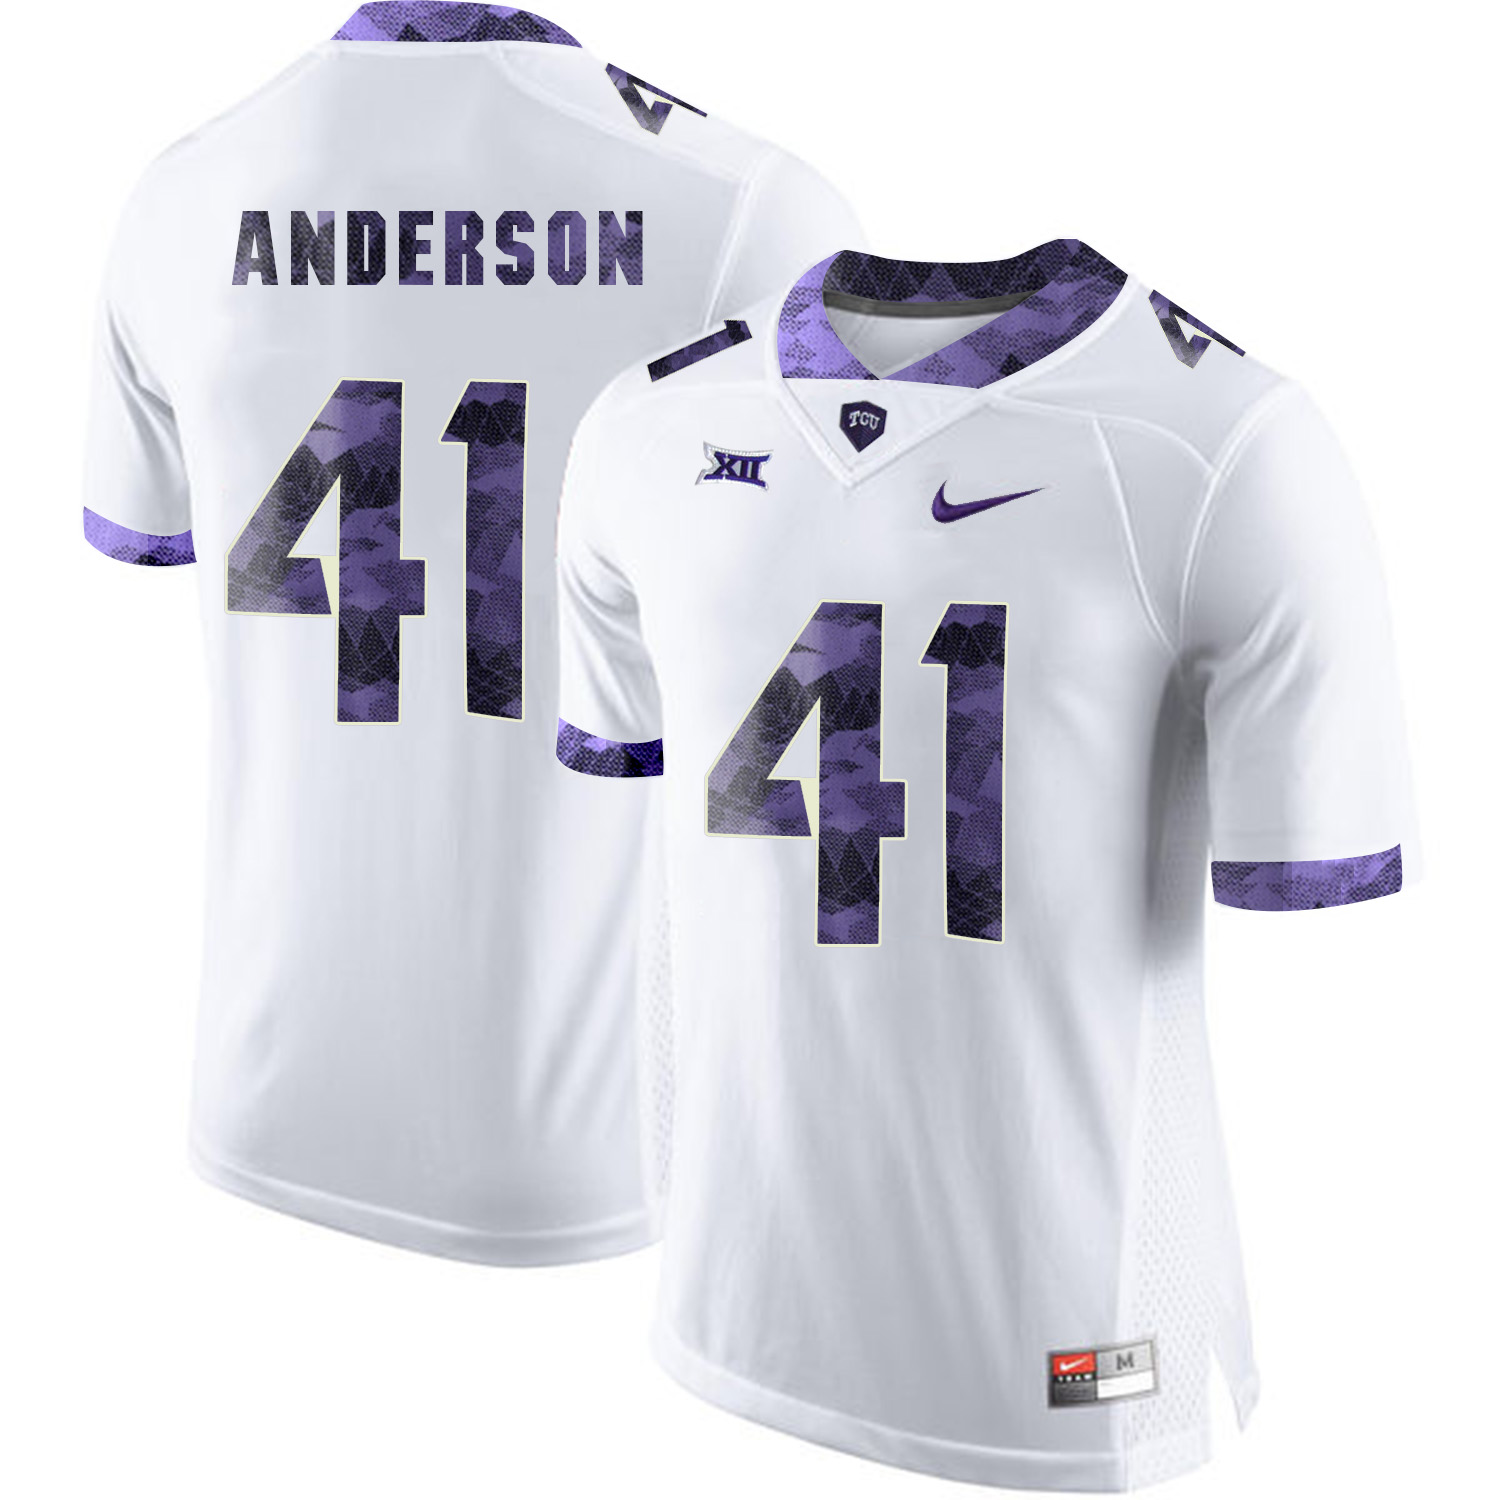 TCU Horned Frogs 41 Jonathan Anderson White Print College Football Limited Jersey